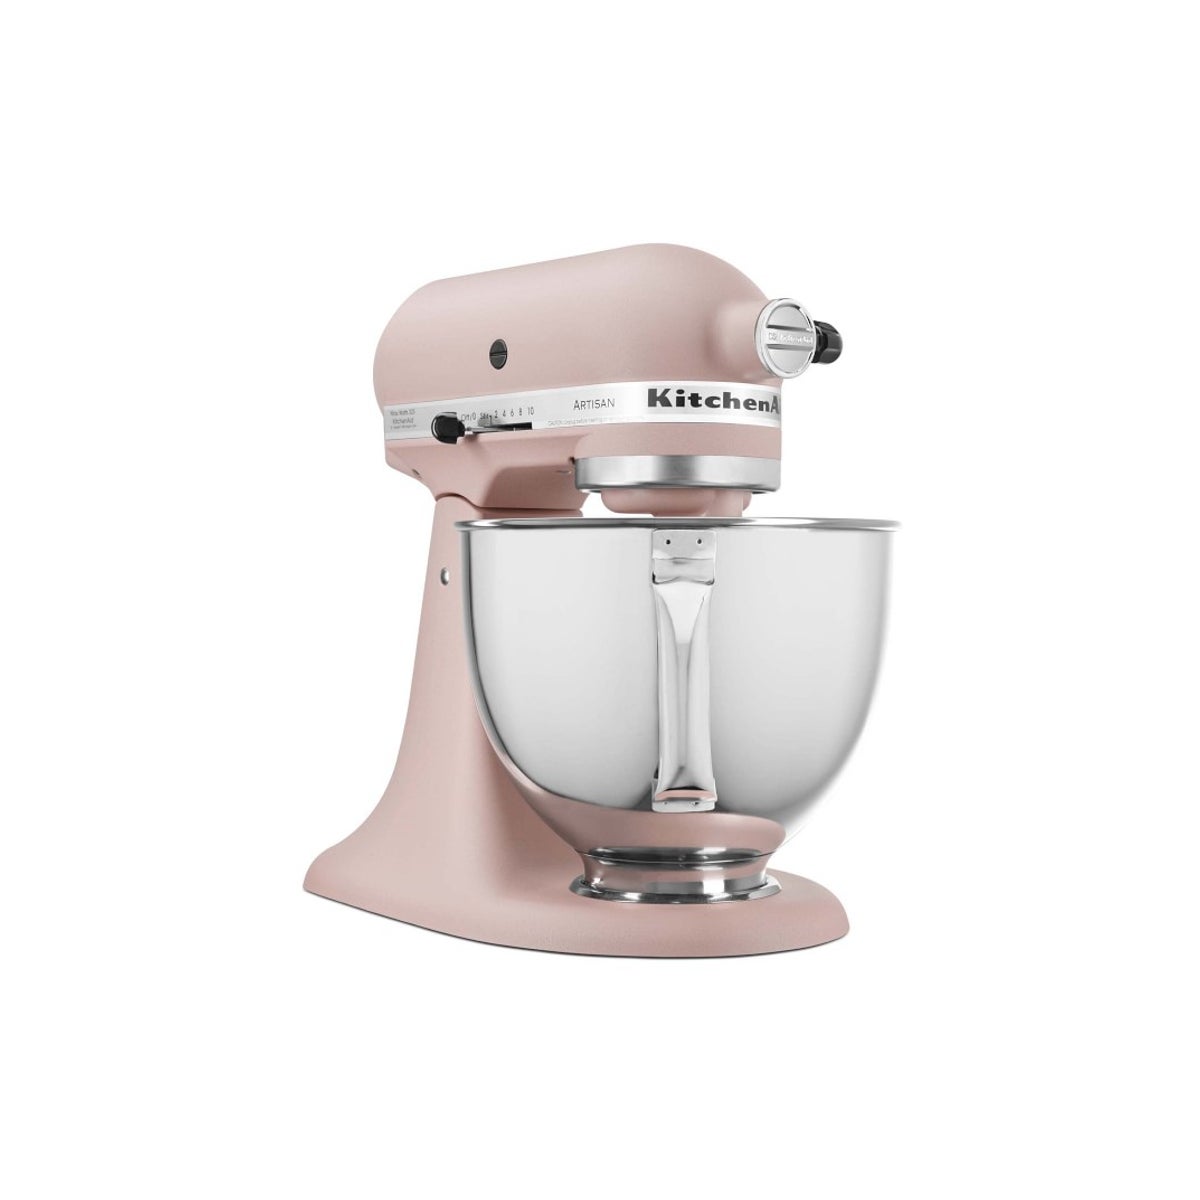 Best Stand Mixer to Fulfill Great British Bake Off Fantasy | Saveur